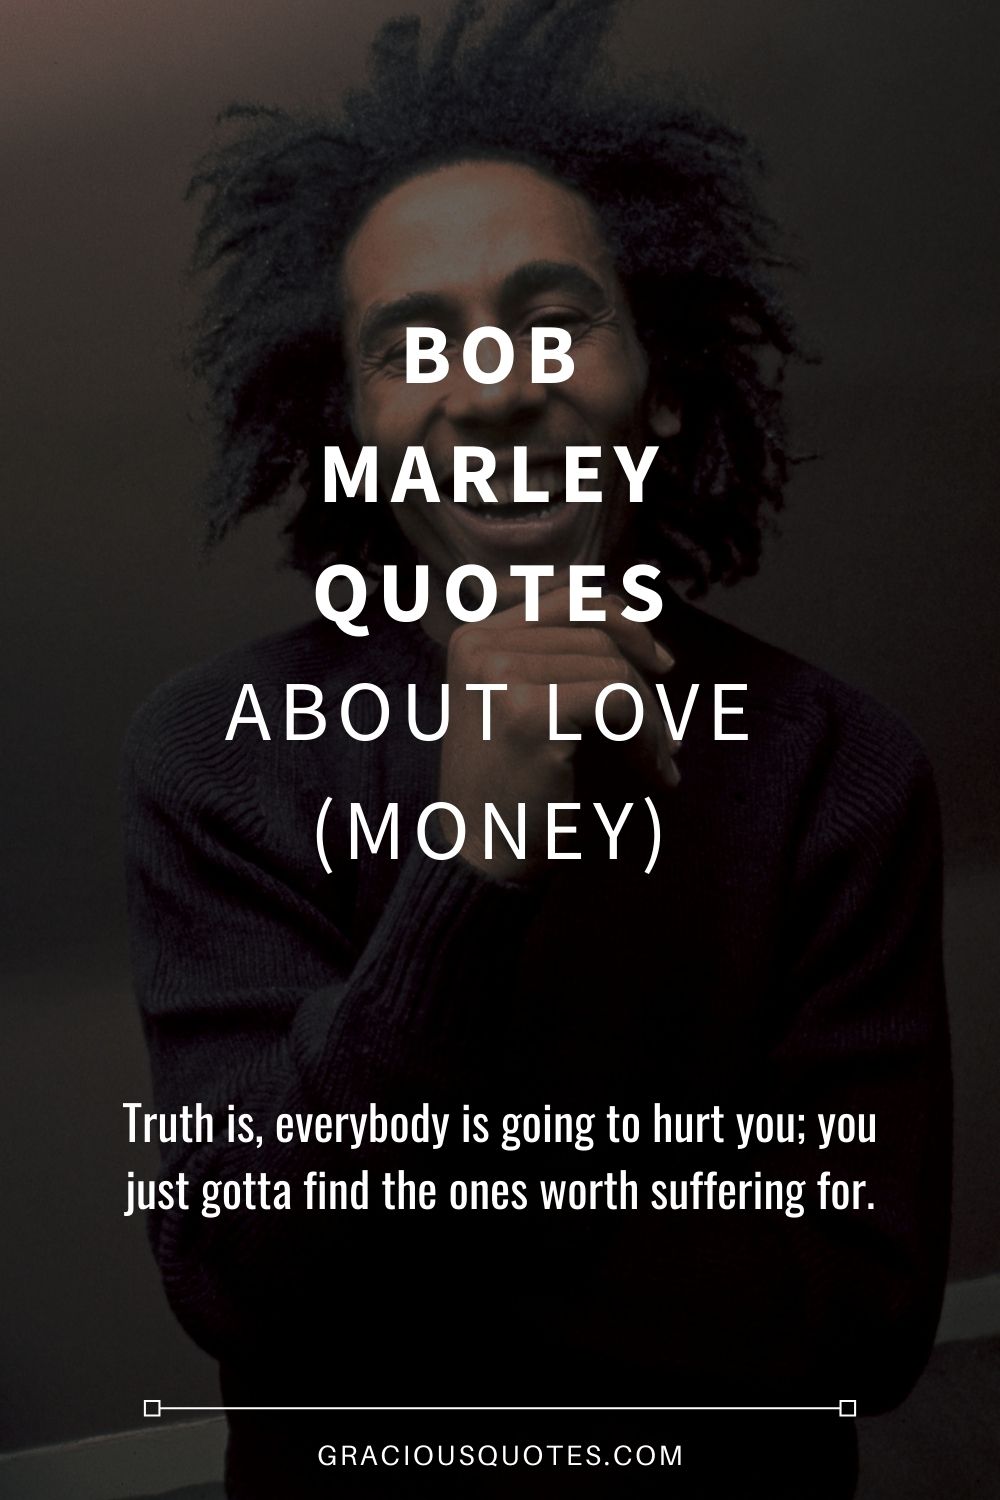 Bob Marley Quotes About Love (MONEY) - Gracious Quotes